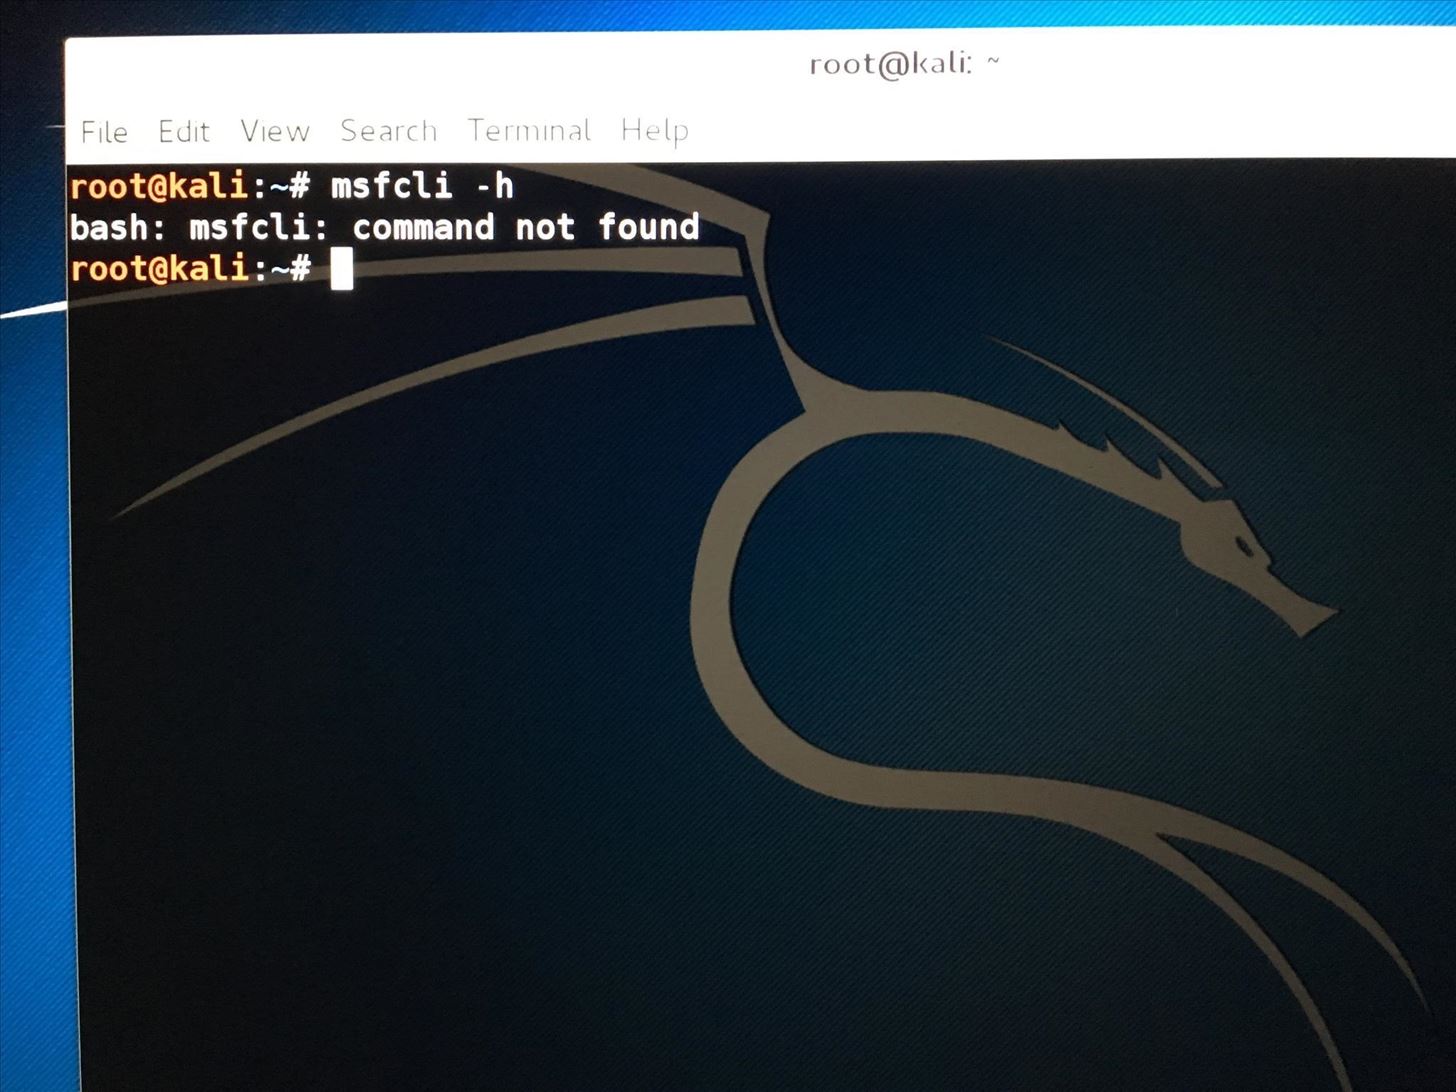 3 Problems About Metasploit(with Screenshots)